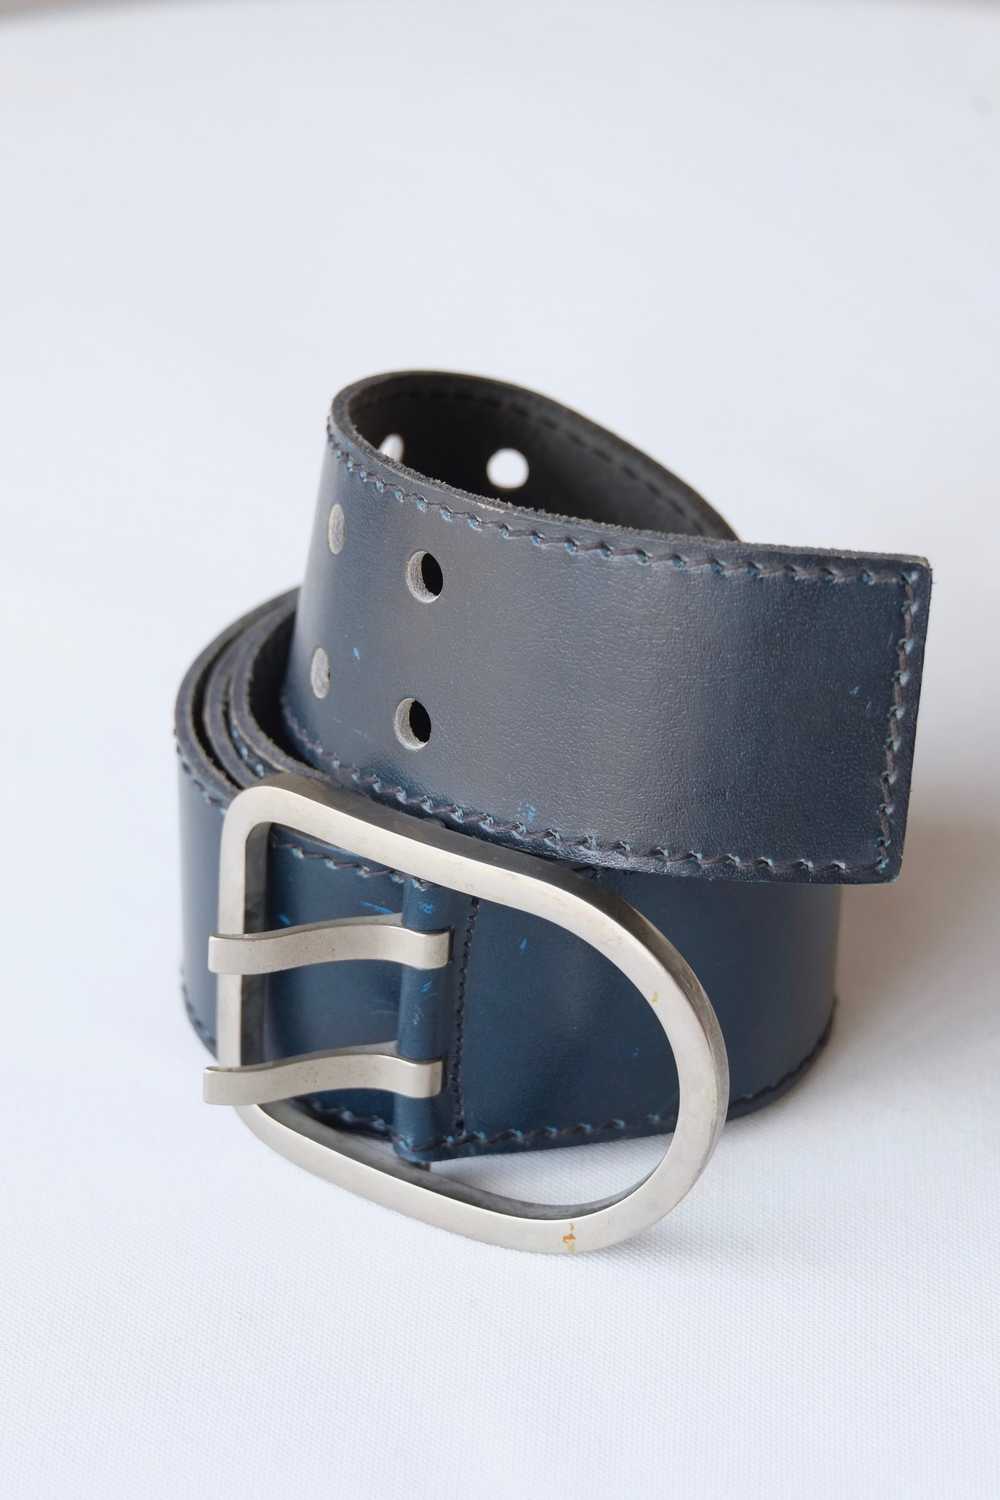 L'AIGLON Double Prong Rounded Buckle Leather Belt - image 4